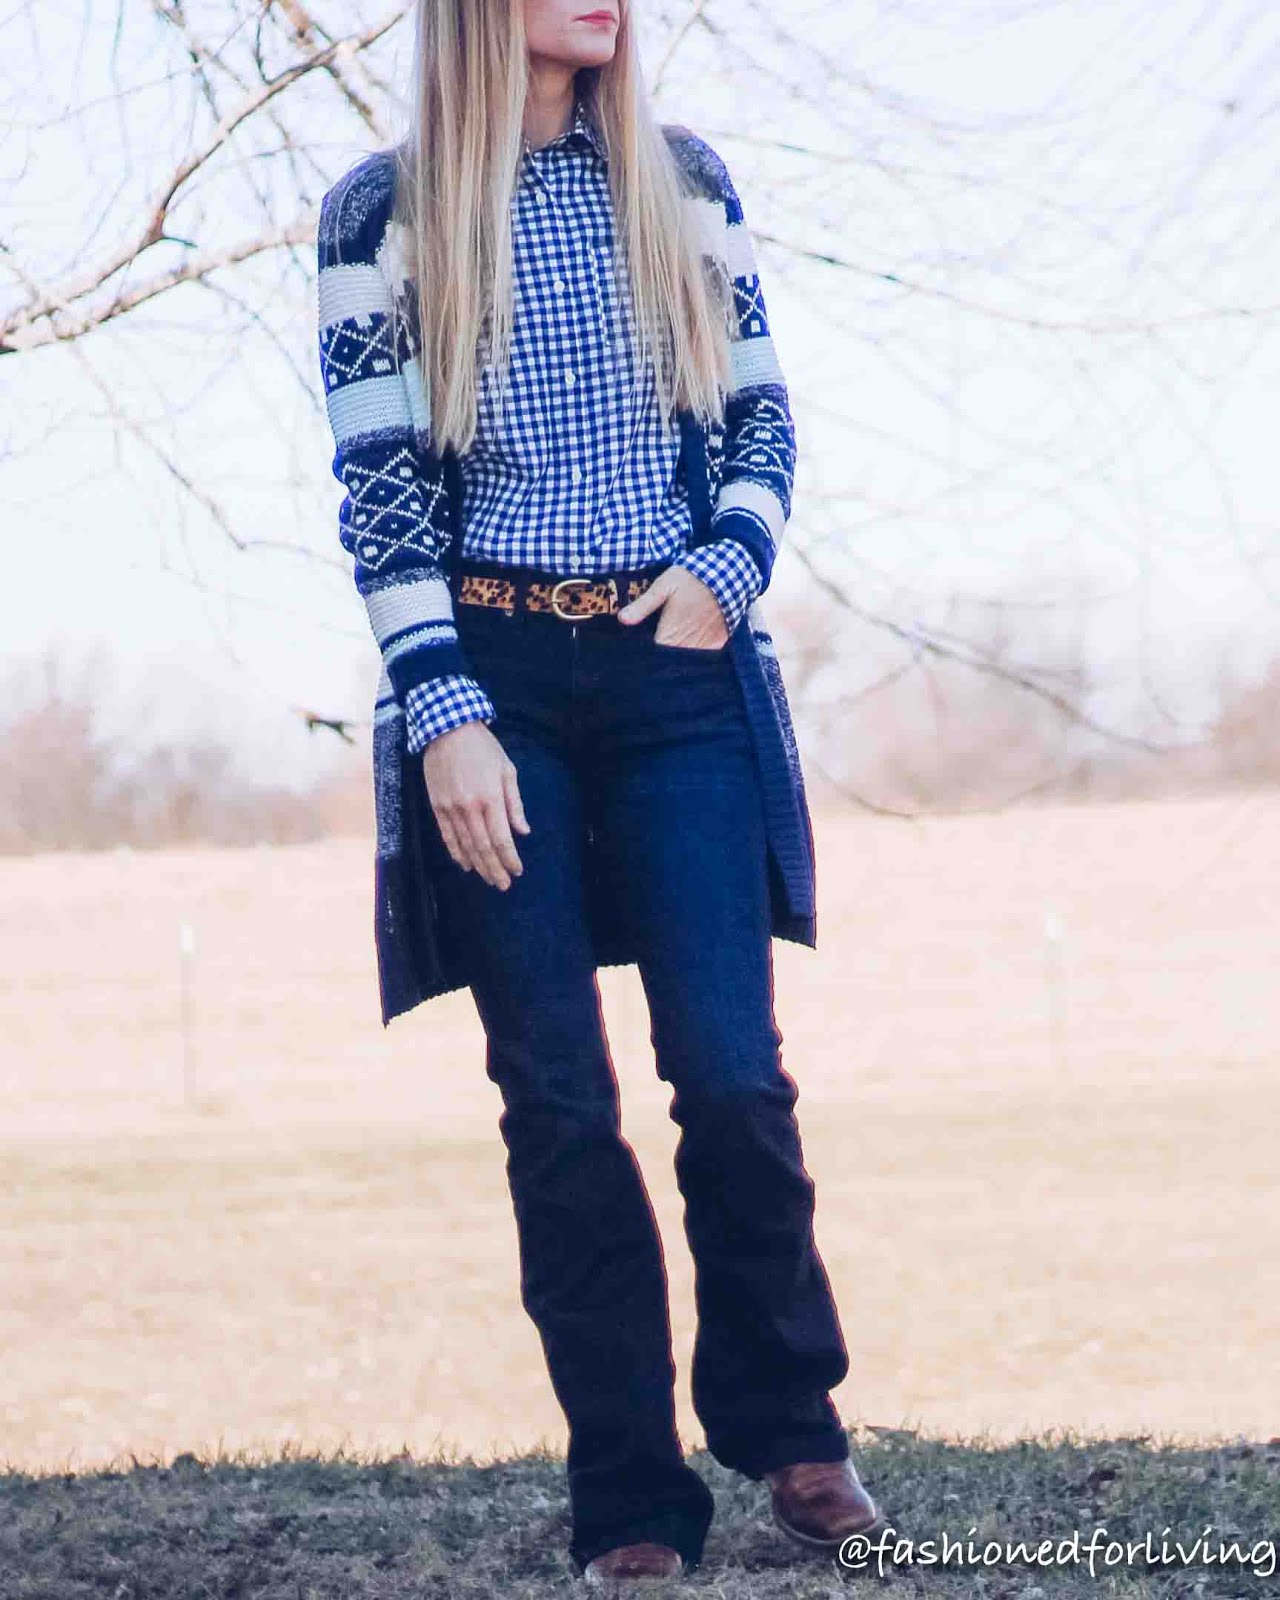 square toe cowboy boots outfit with trouser jeans and long cardigan 